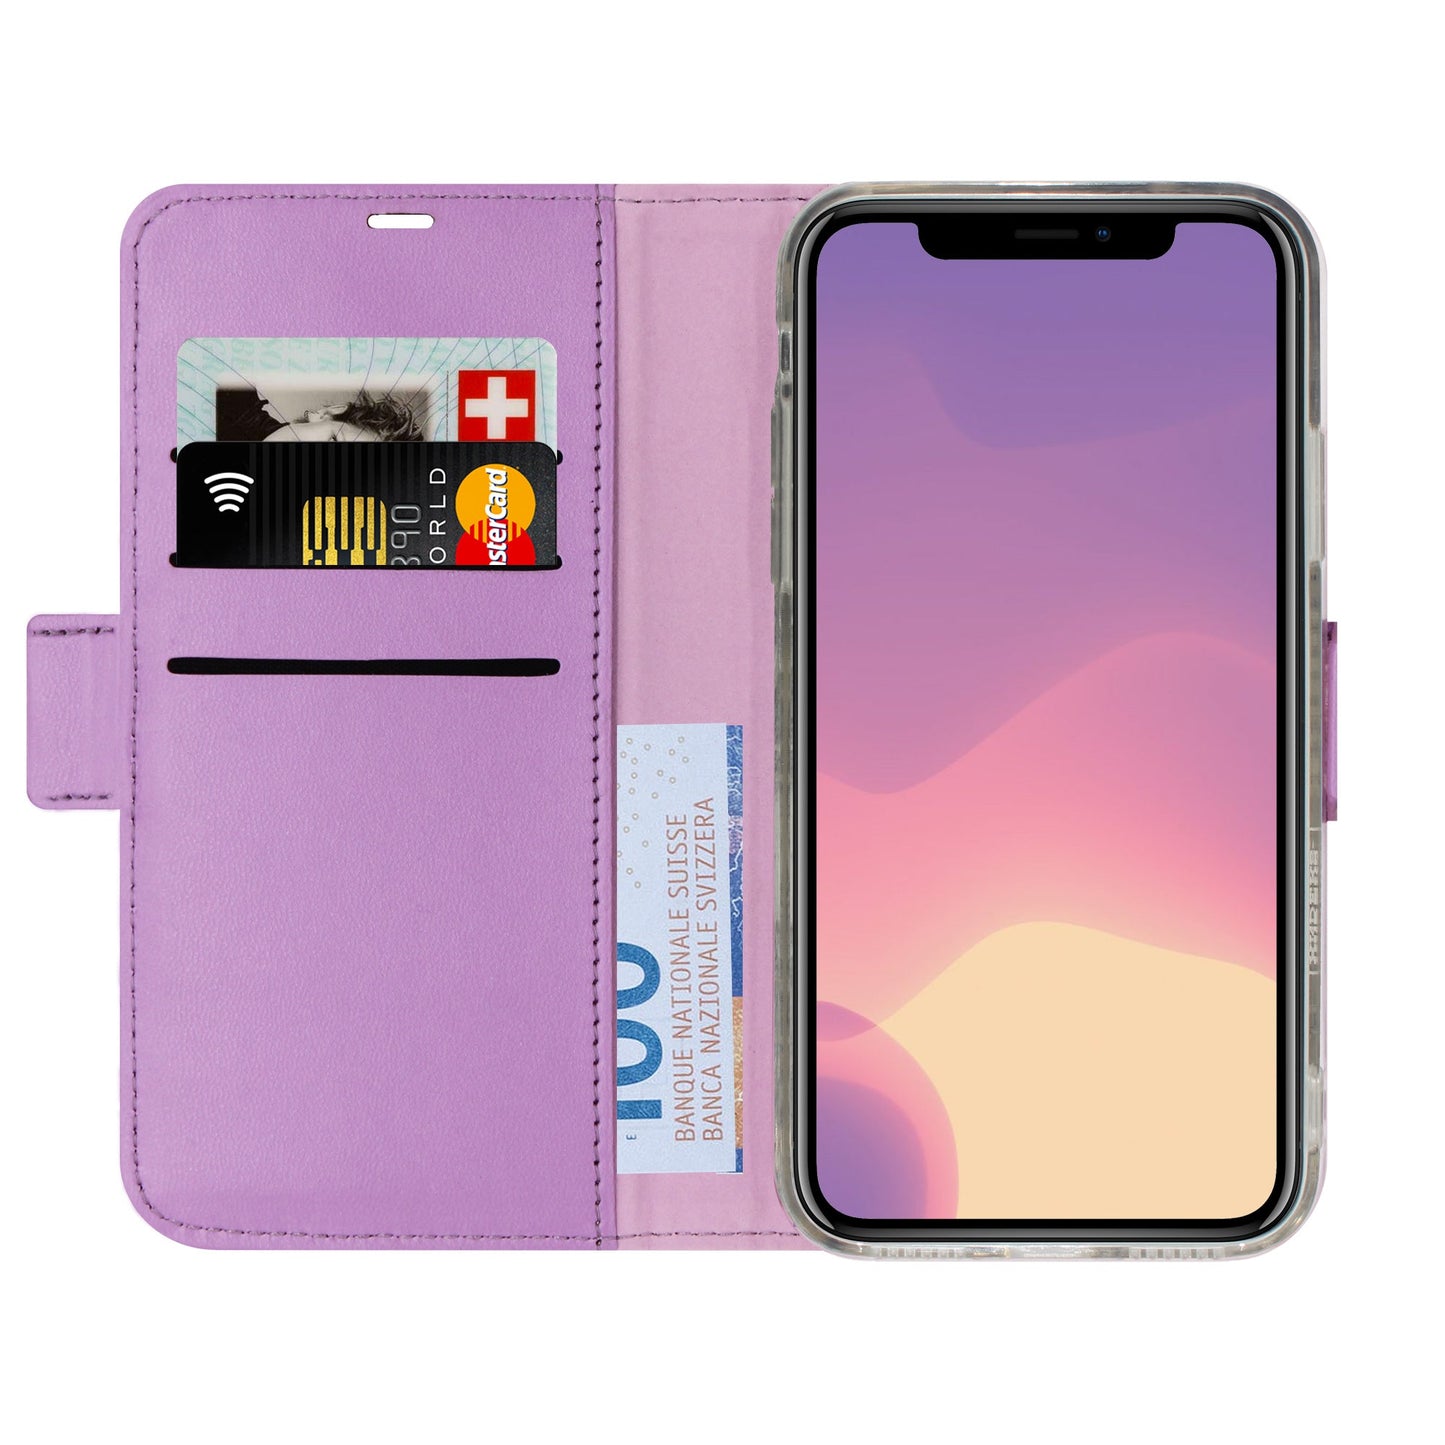 Uni Purple Victor Case for iPhone XR